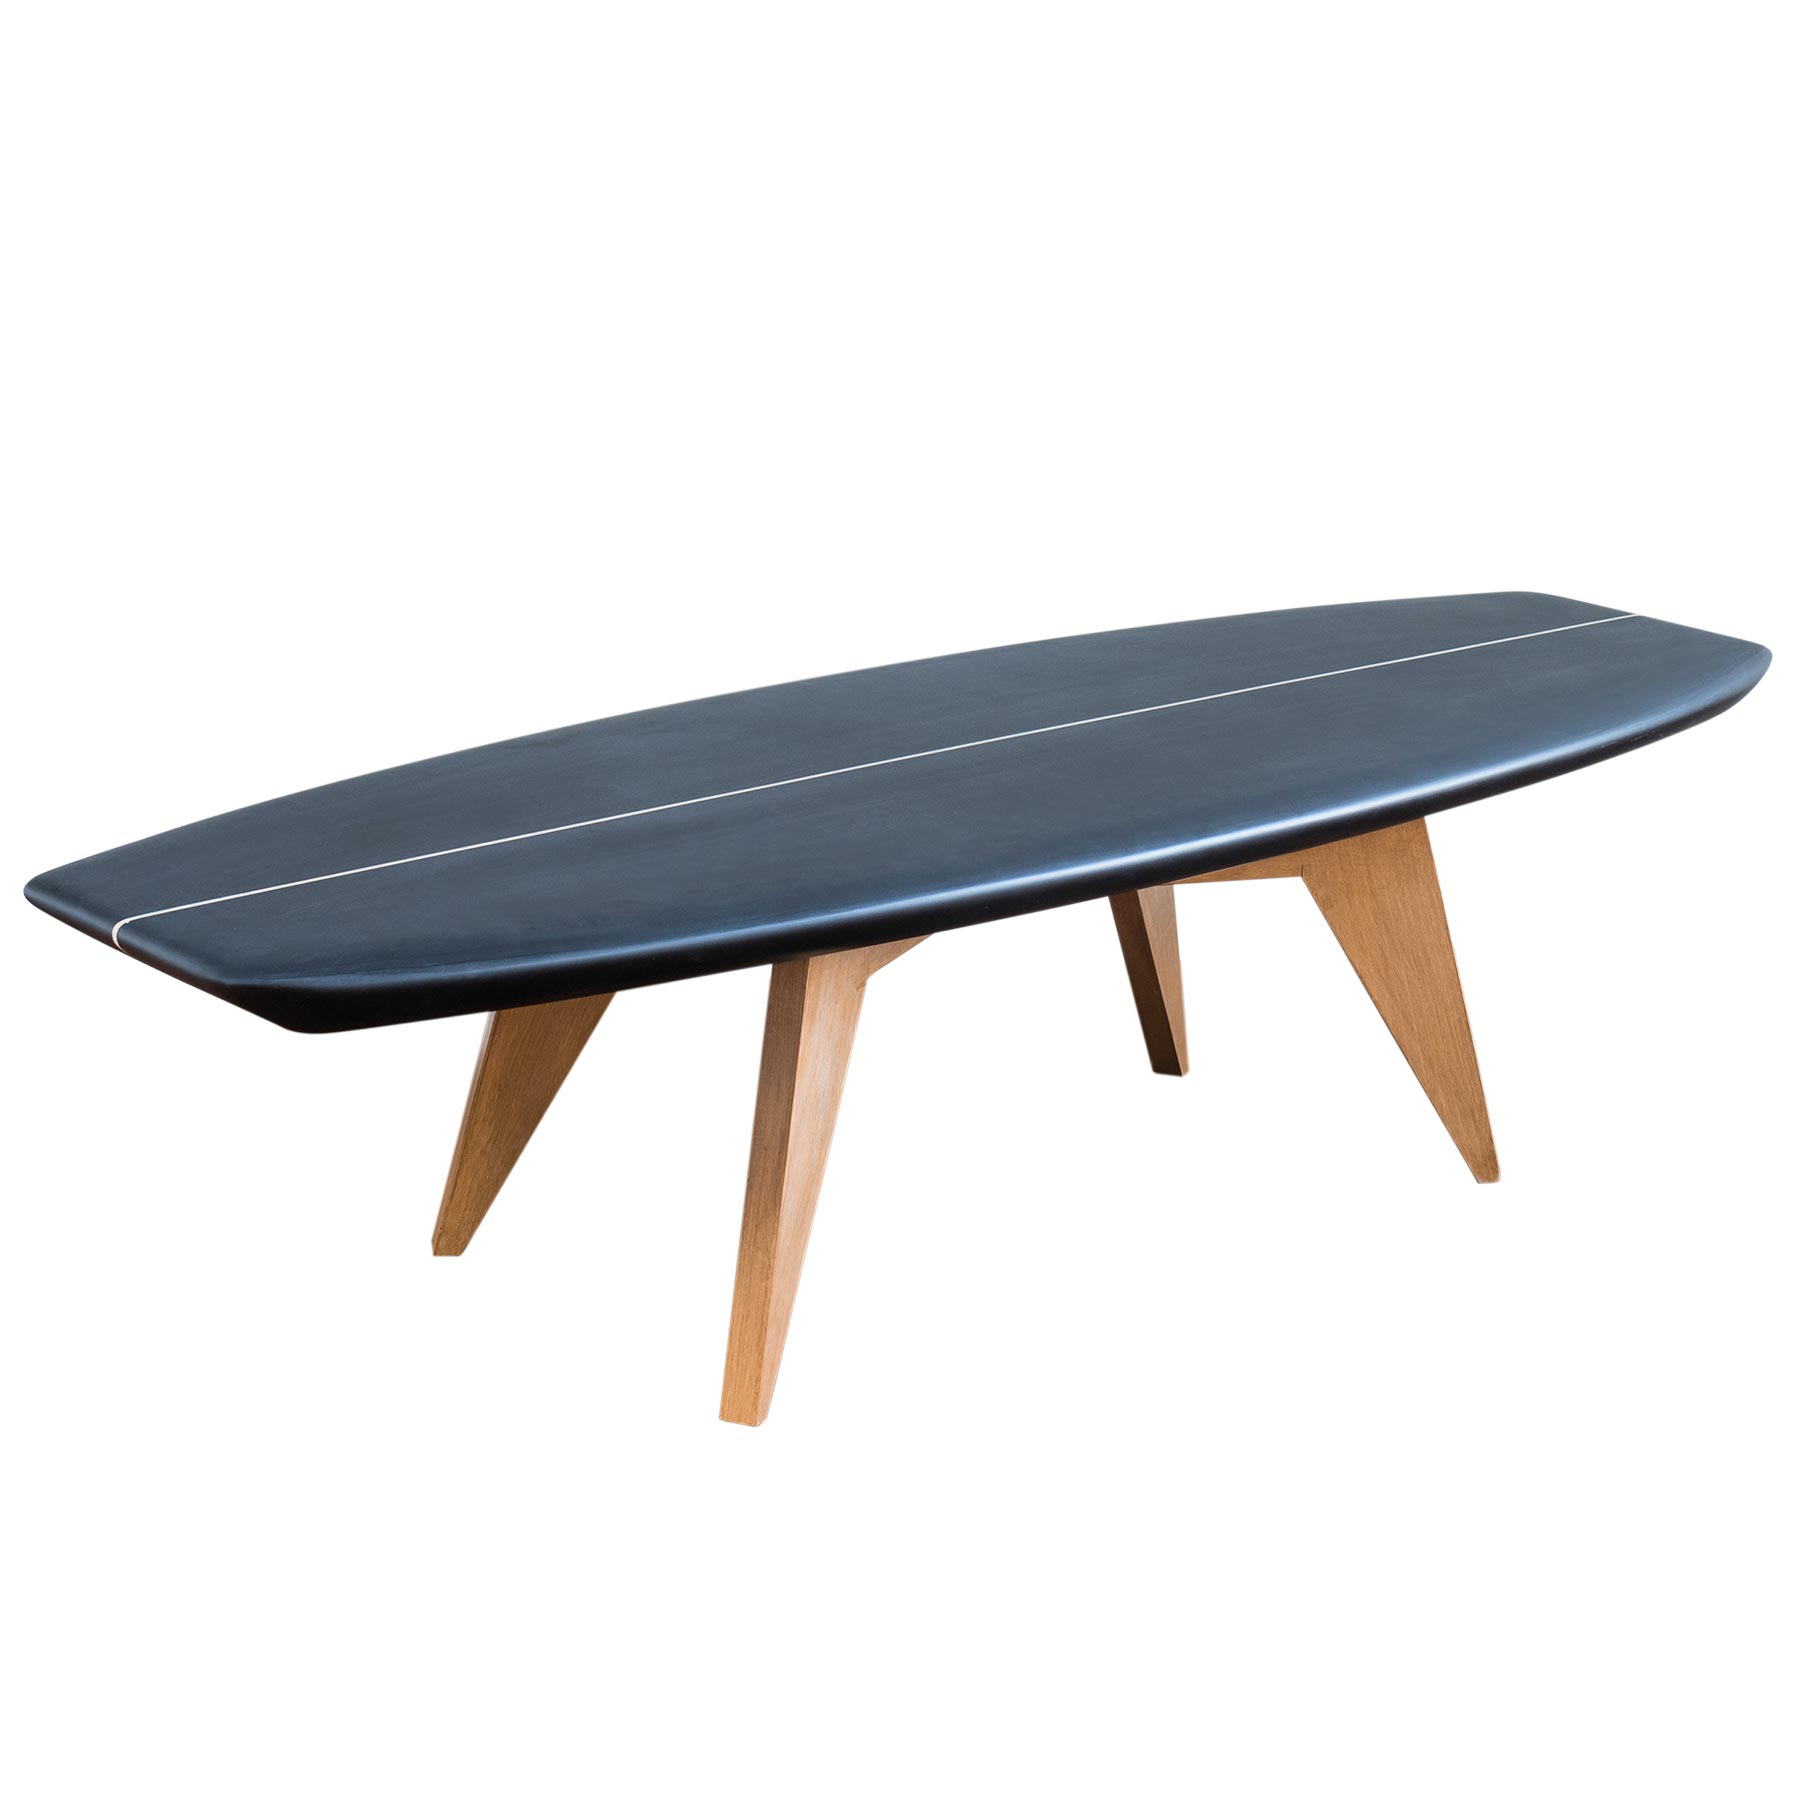 Salty Design Bolge 59 Black Surfboard Coffee Table throughout sizing 1800 X 1800